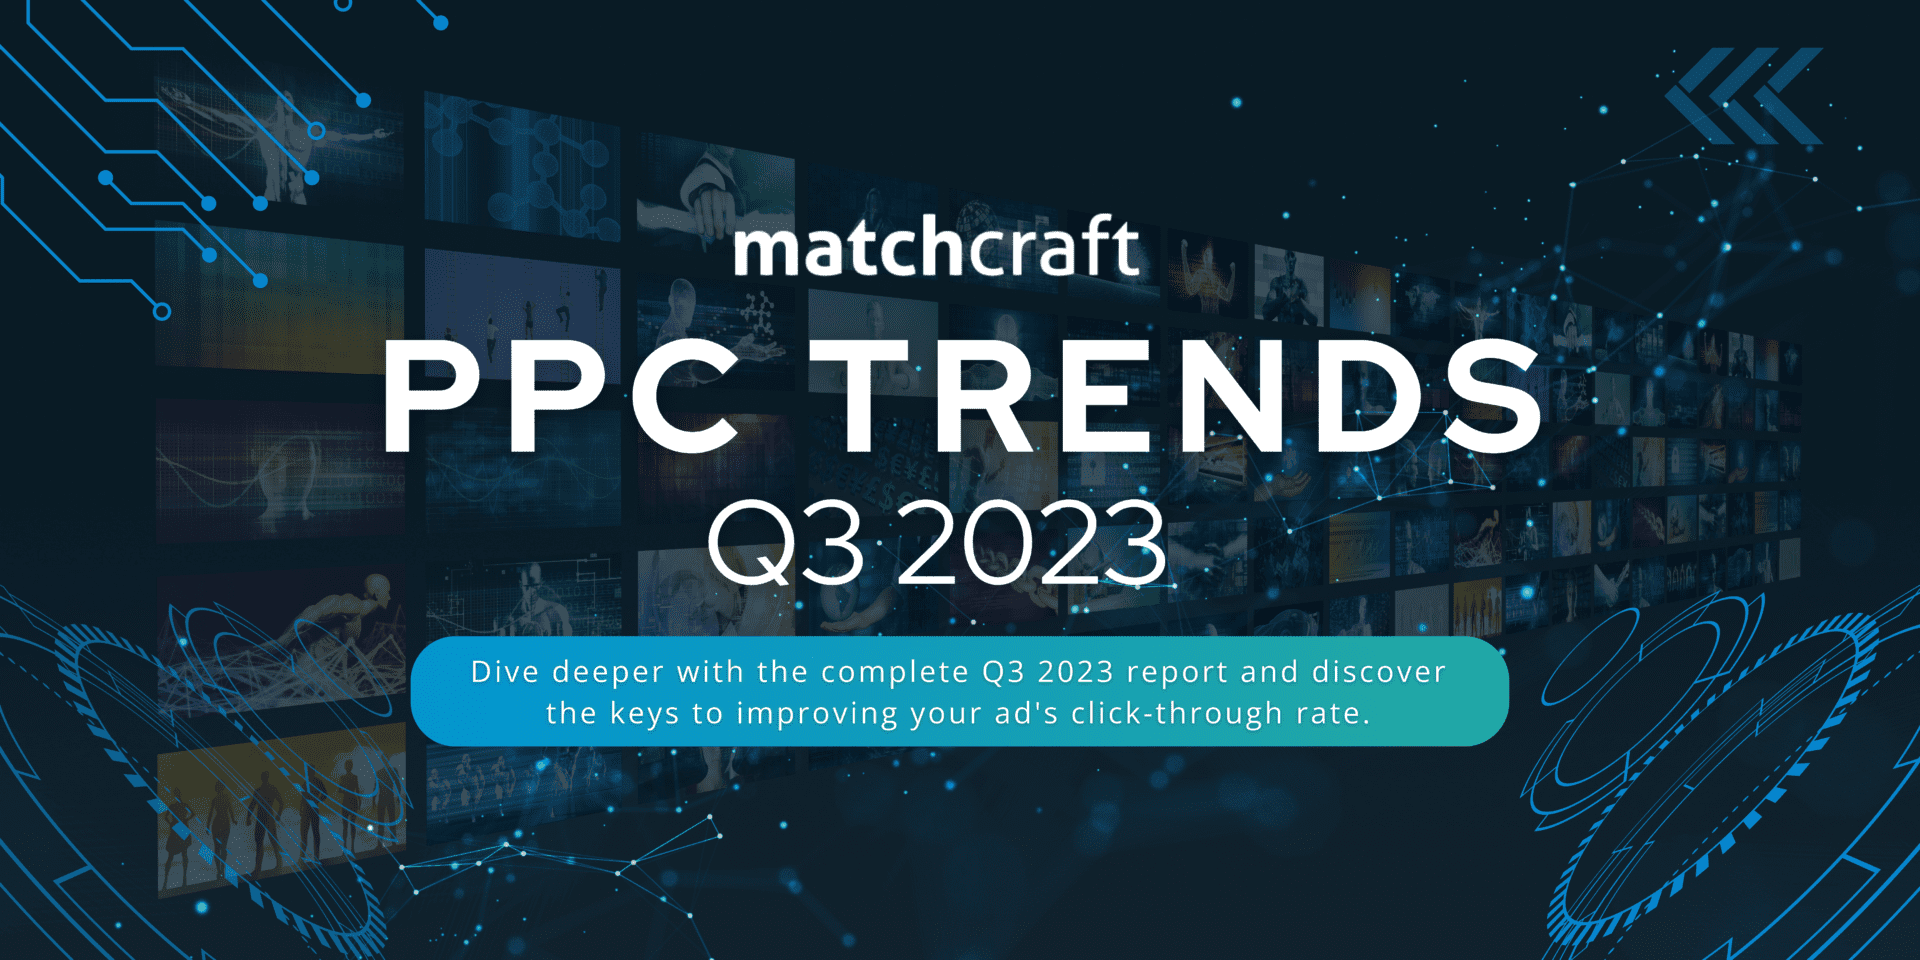 MatchCraft’s Q3 2023 CPC and CTR Insights